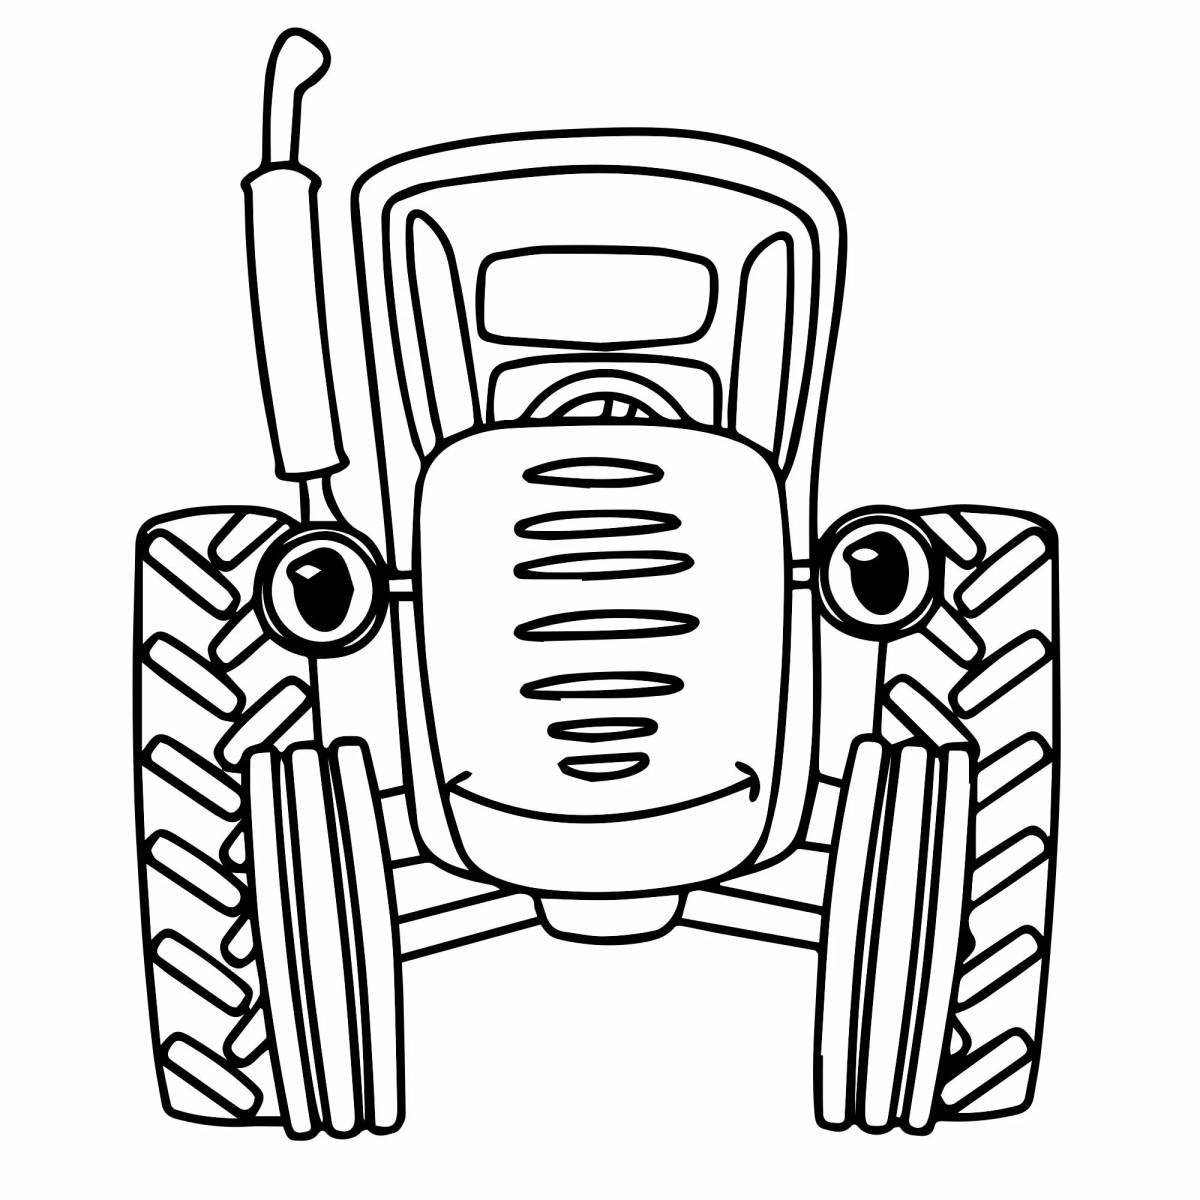 Exciting tractor coloring page